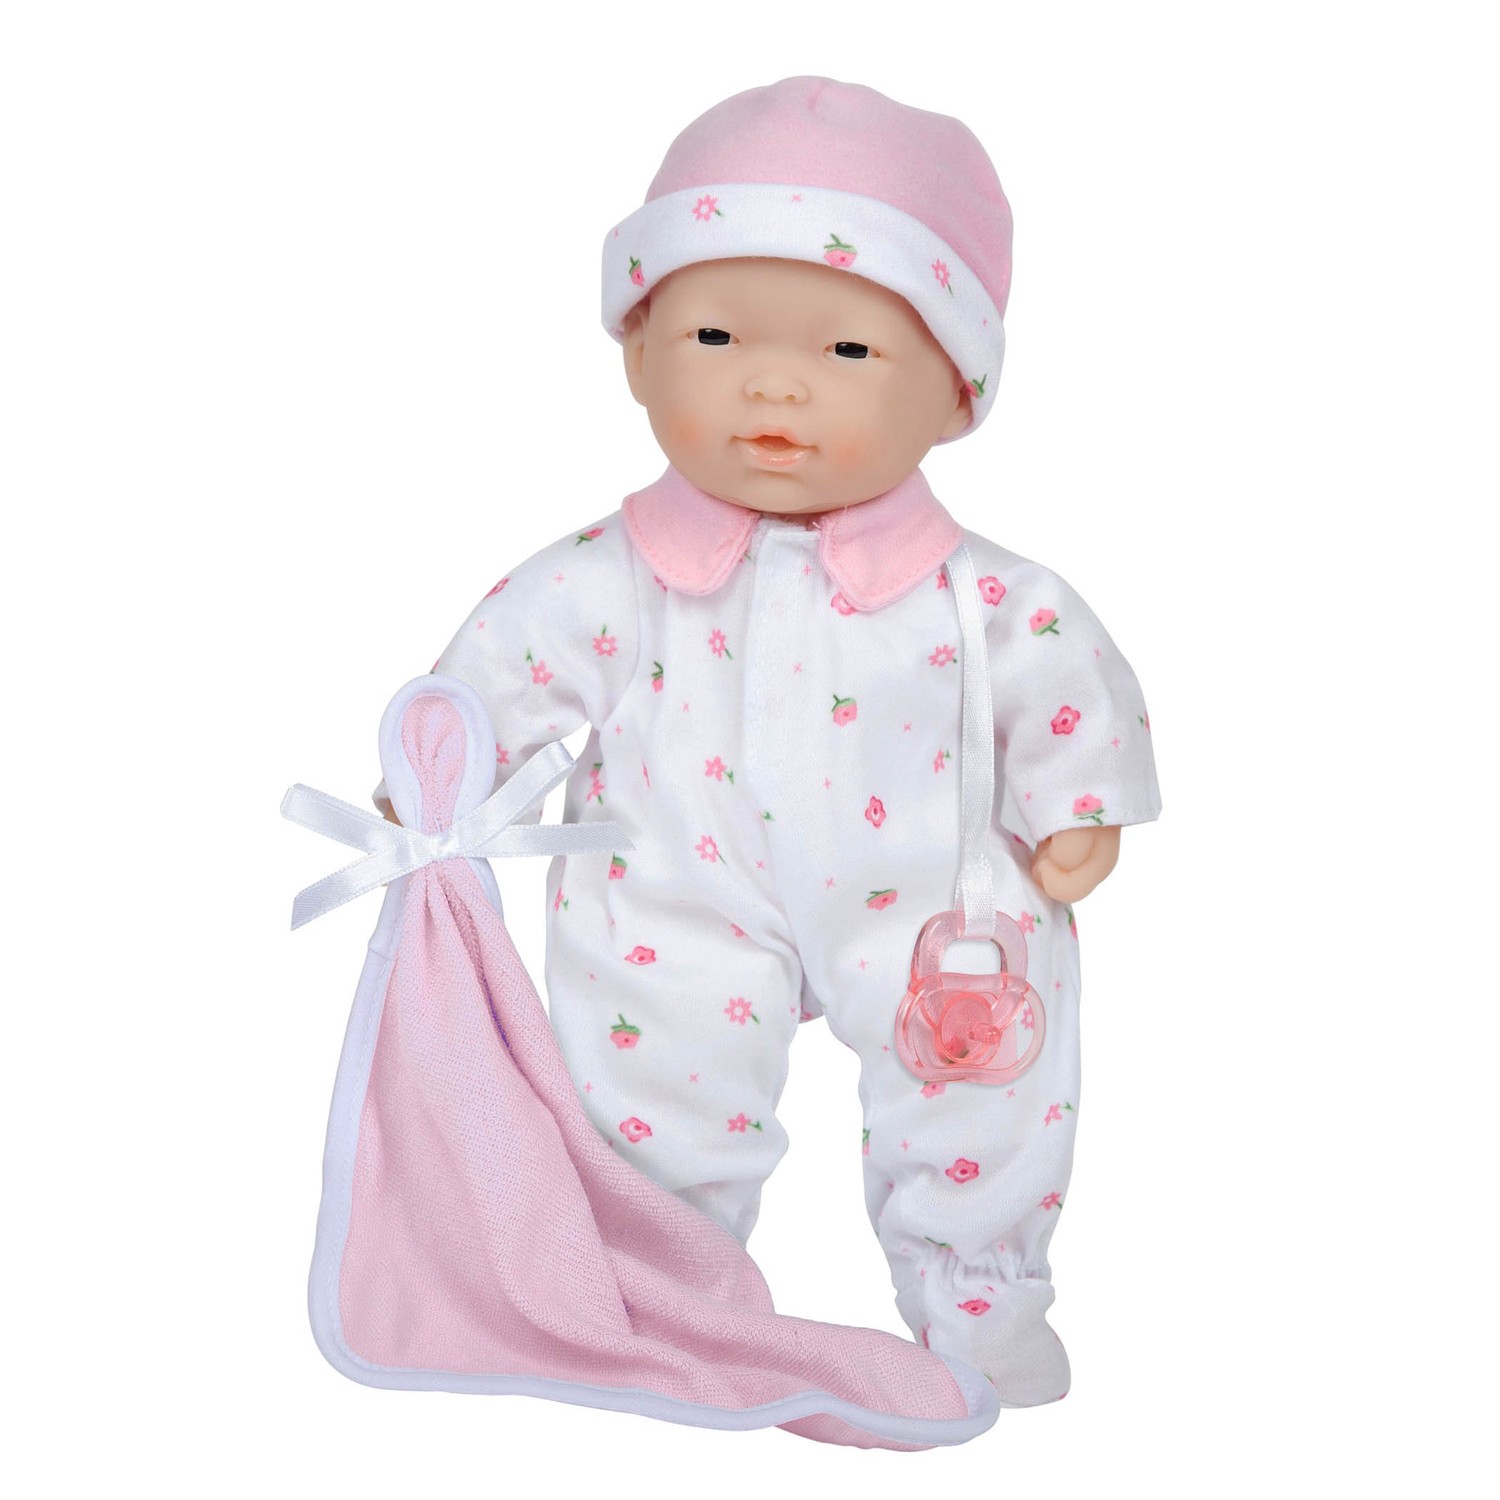 La Baby Soft 11" Baby Doll, Pink with Blanket, Asian